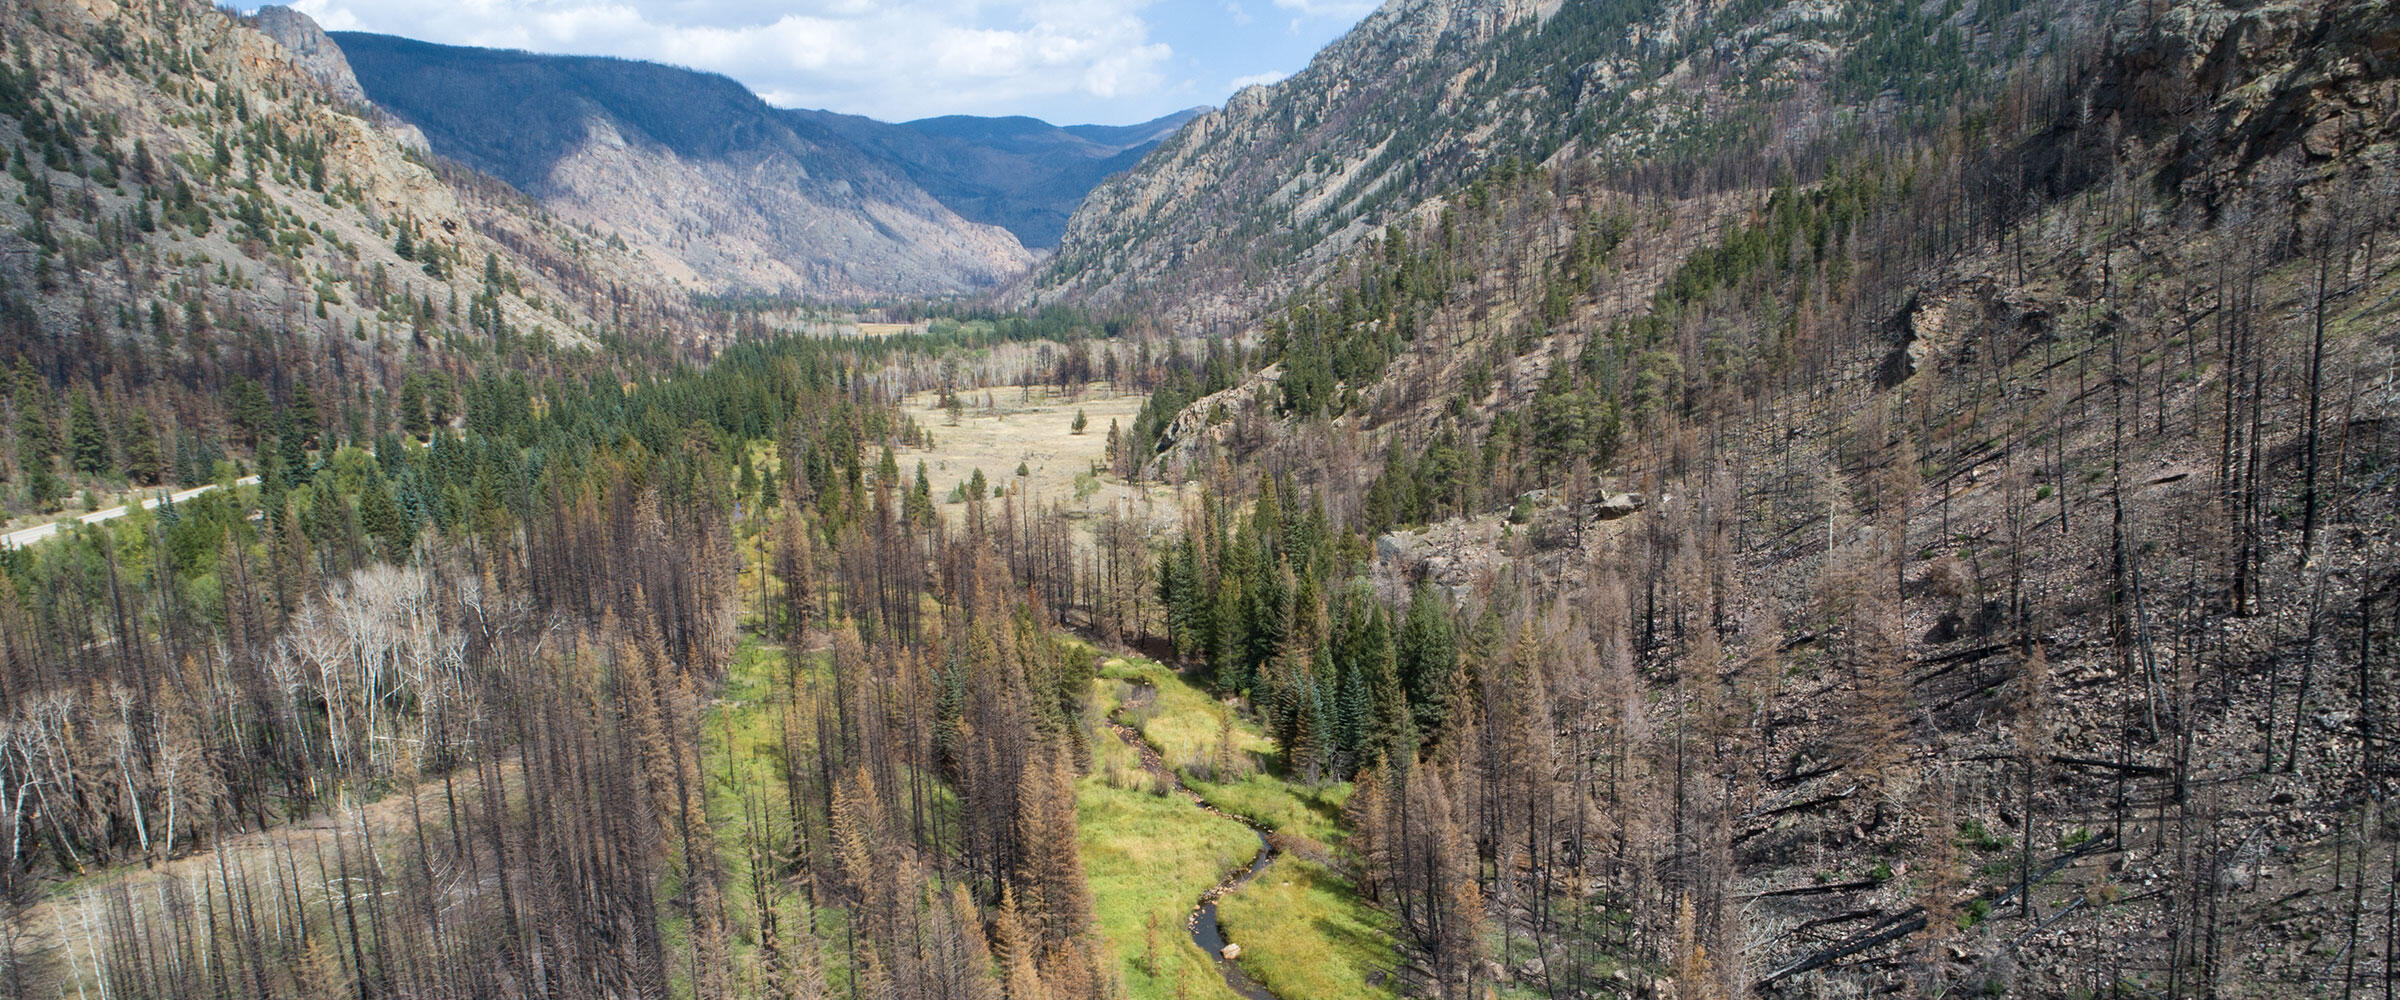 A stream surrounded by green vegetation flows through a canyon blackened by wildfire.